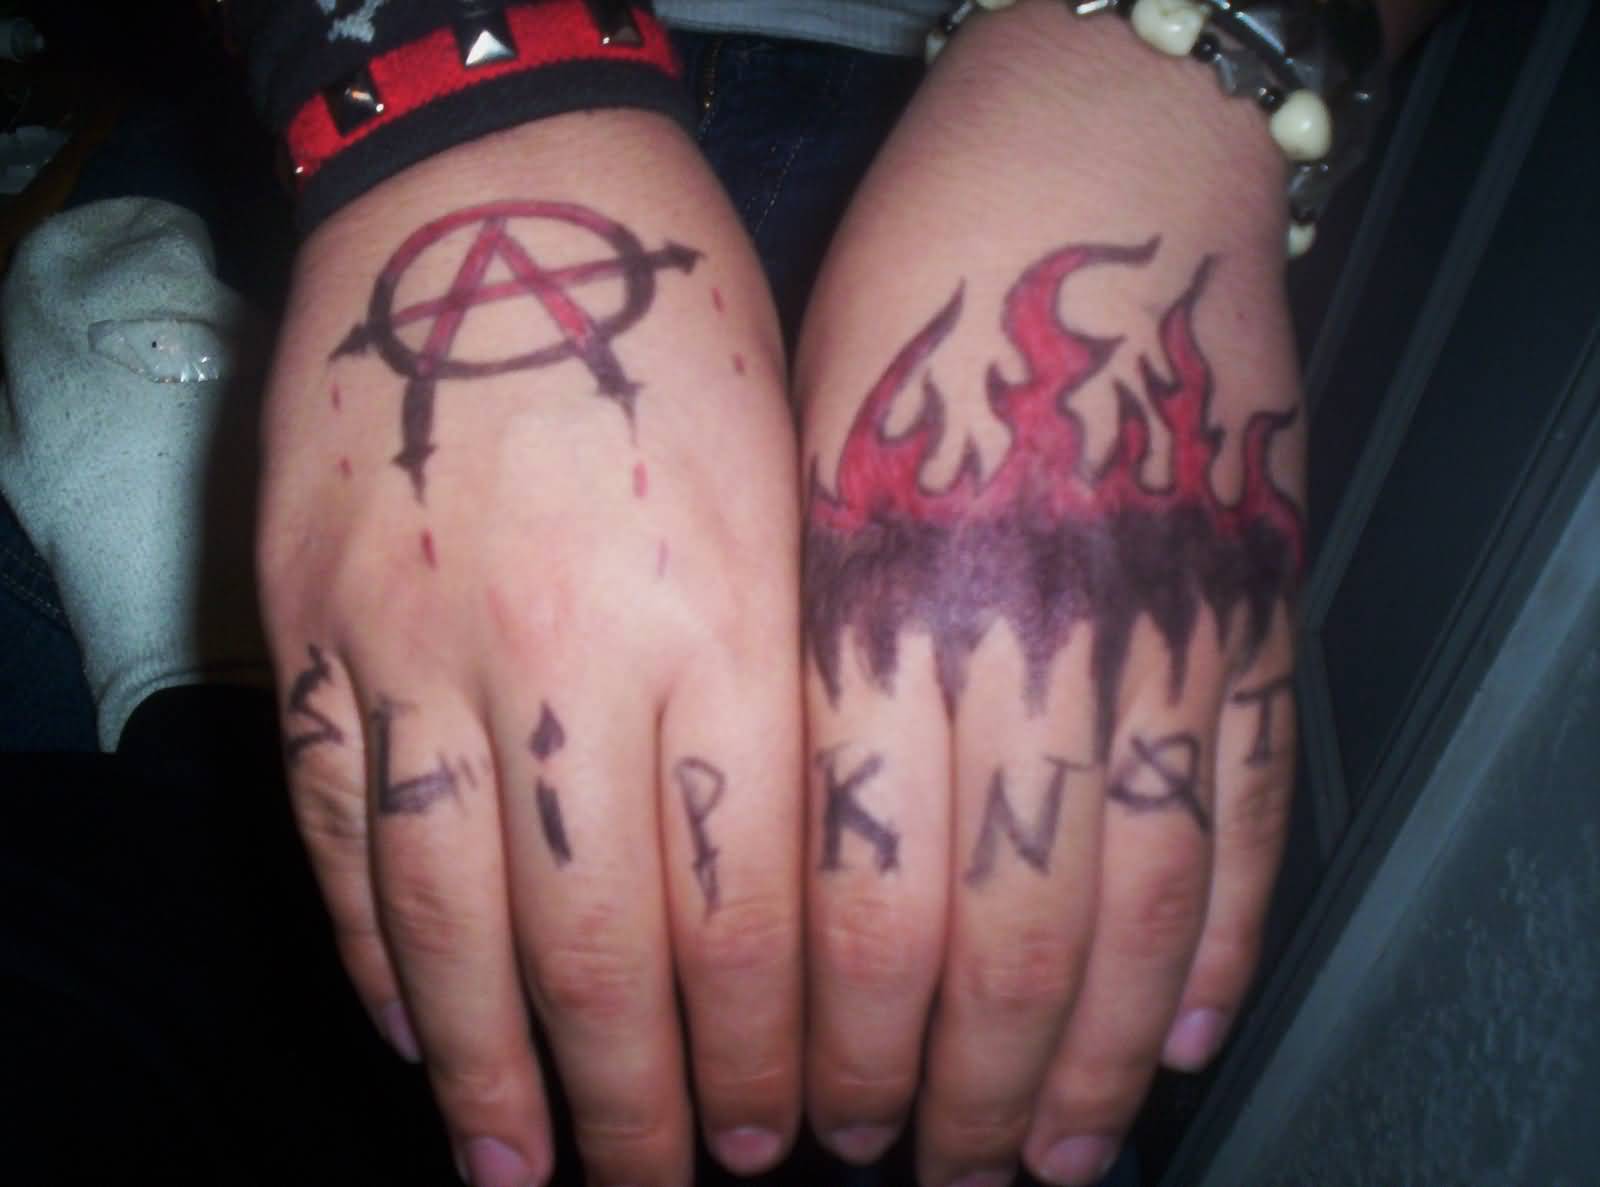 Slipknot Word With Flames And Logo Tattoo On Both Hands By CuttingMouses